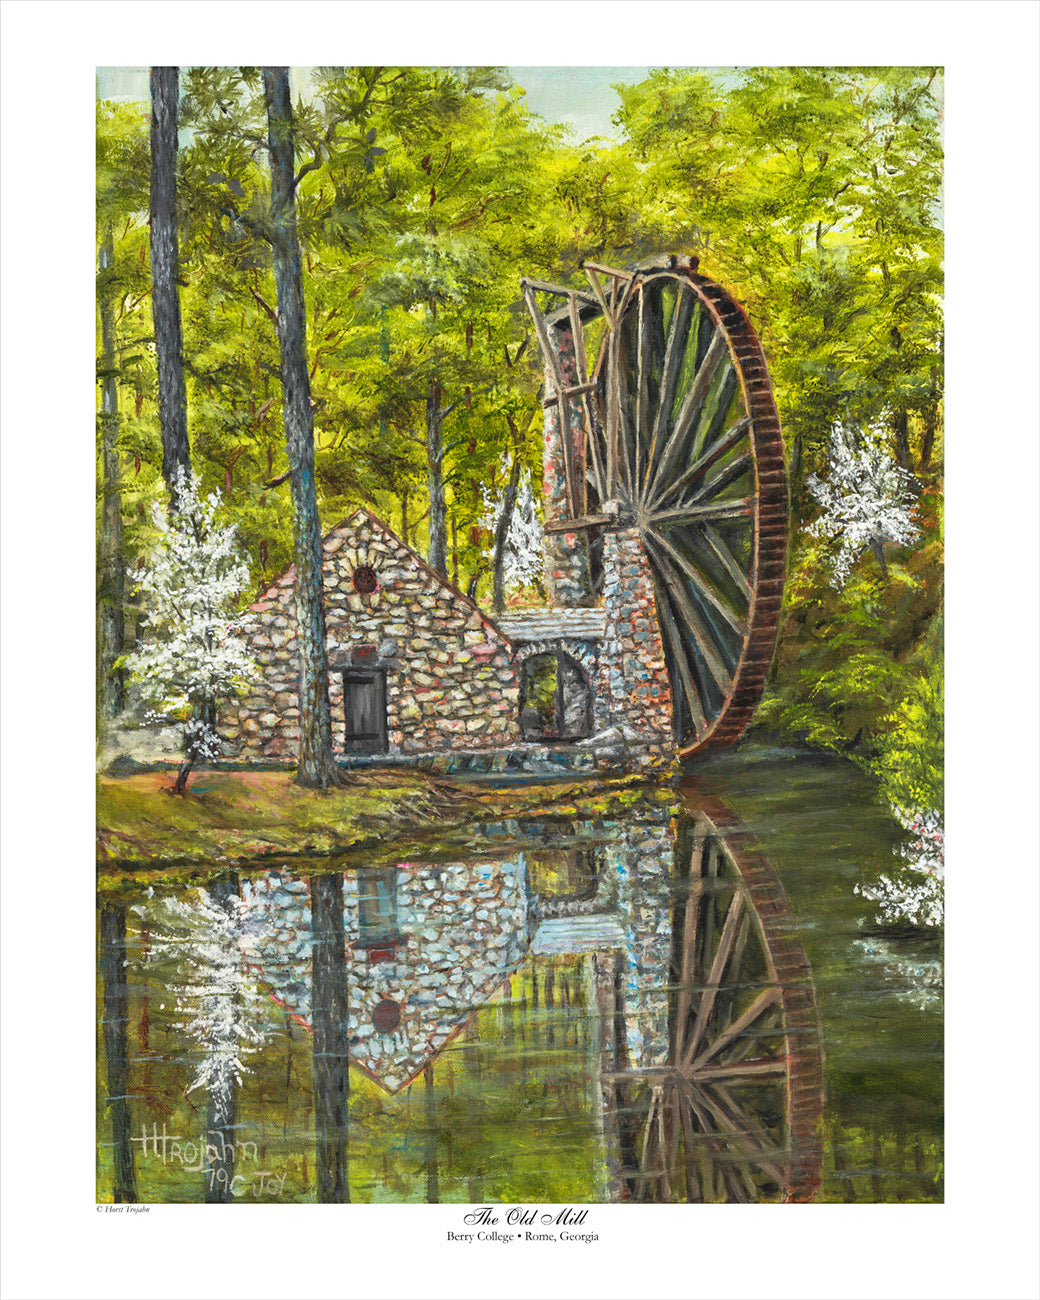 "The Old Mill at Berry College" Print